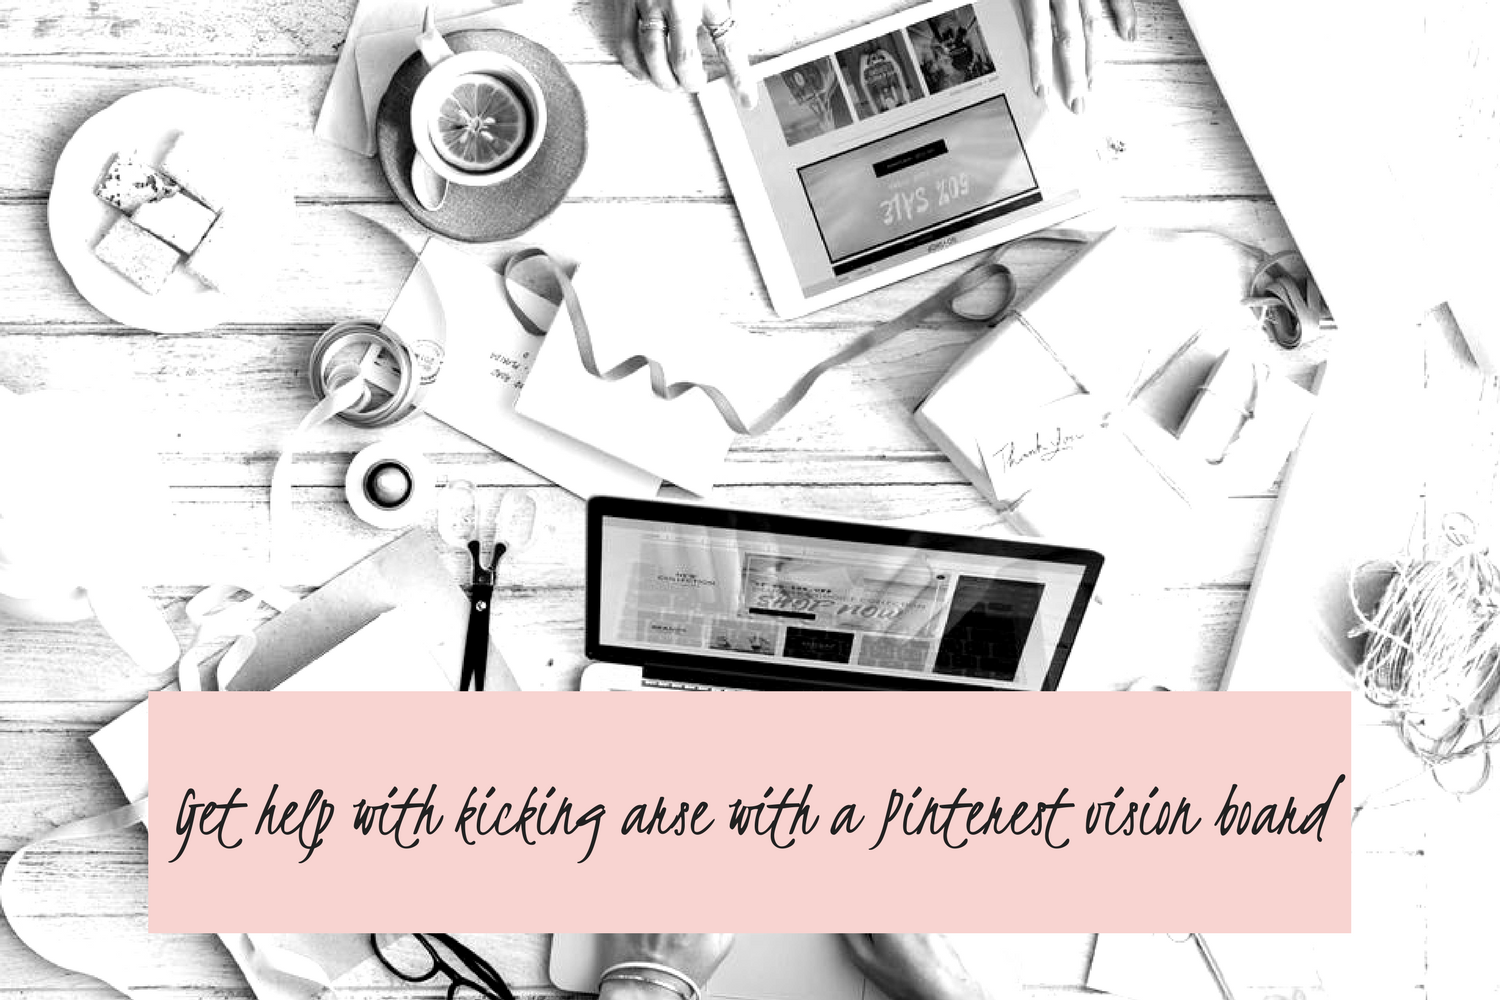 Get help with kicking arse with a Pinterest vision board